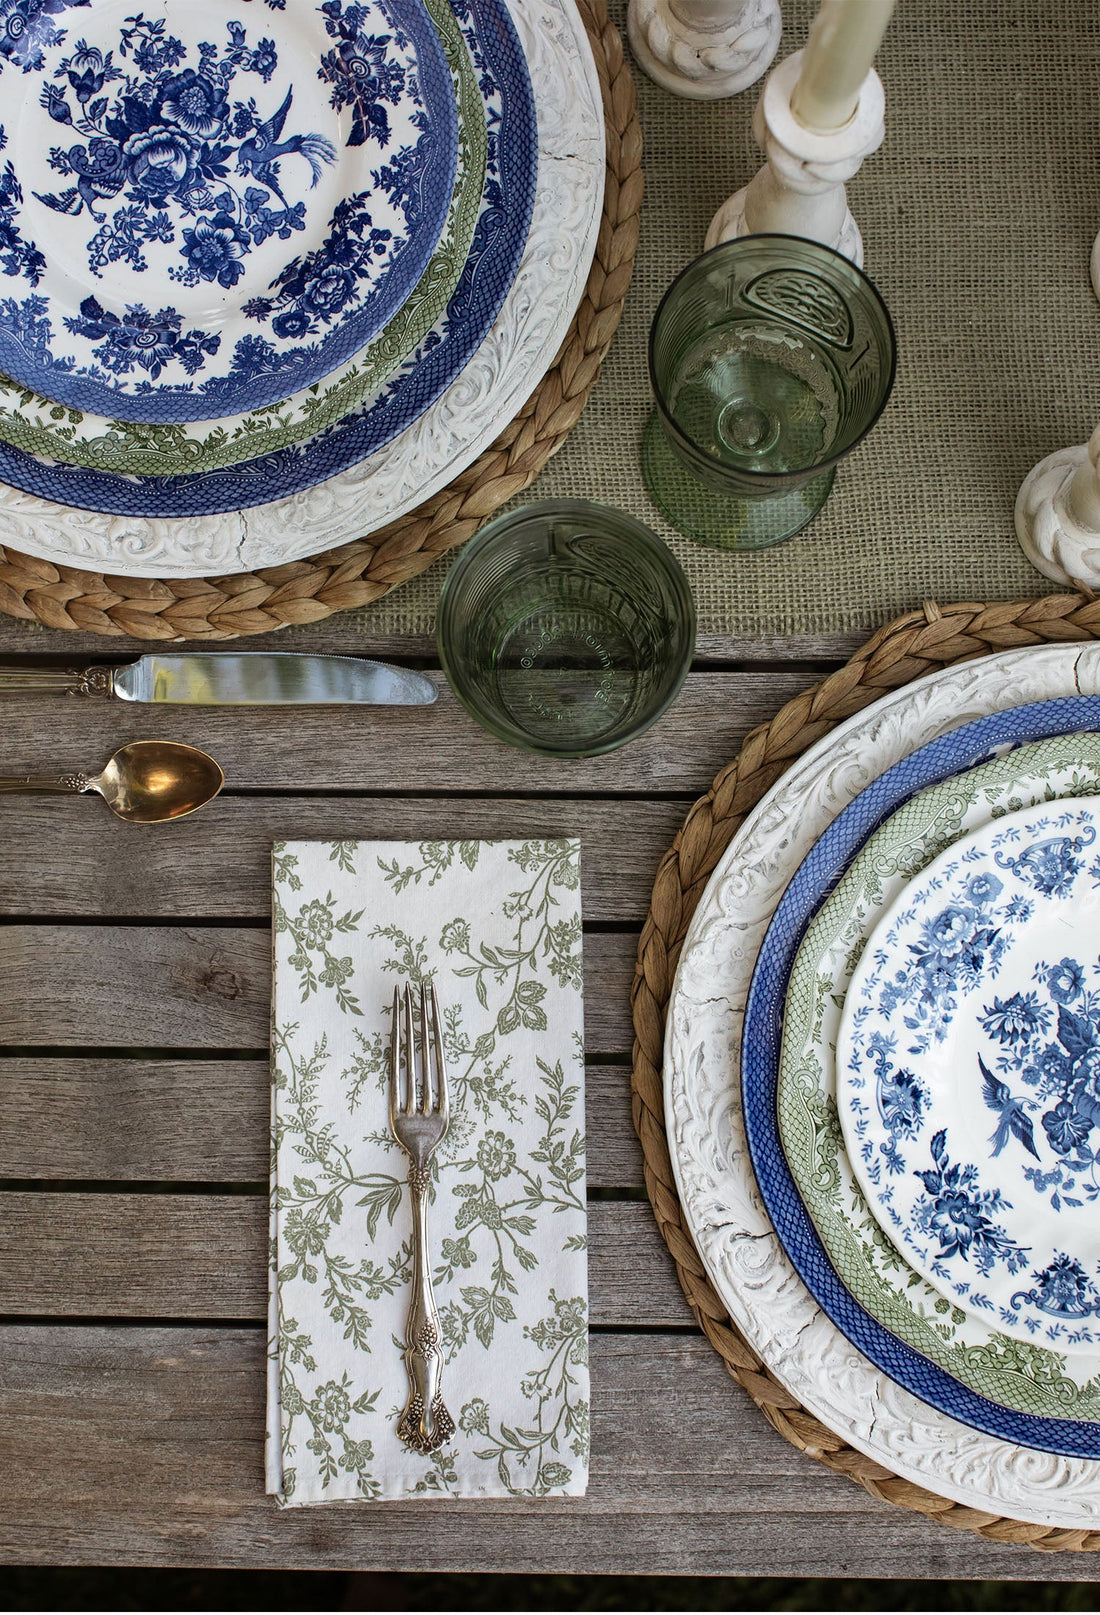 Leslie's Top Five Tips for an Impactful Thanksgiving Table